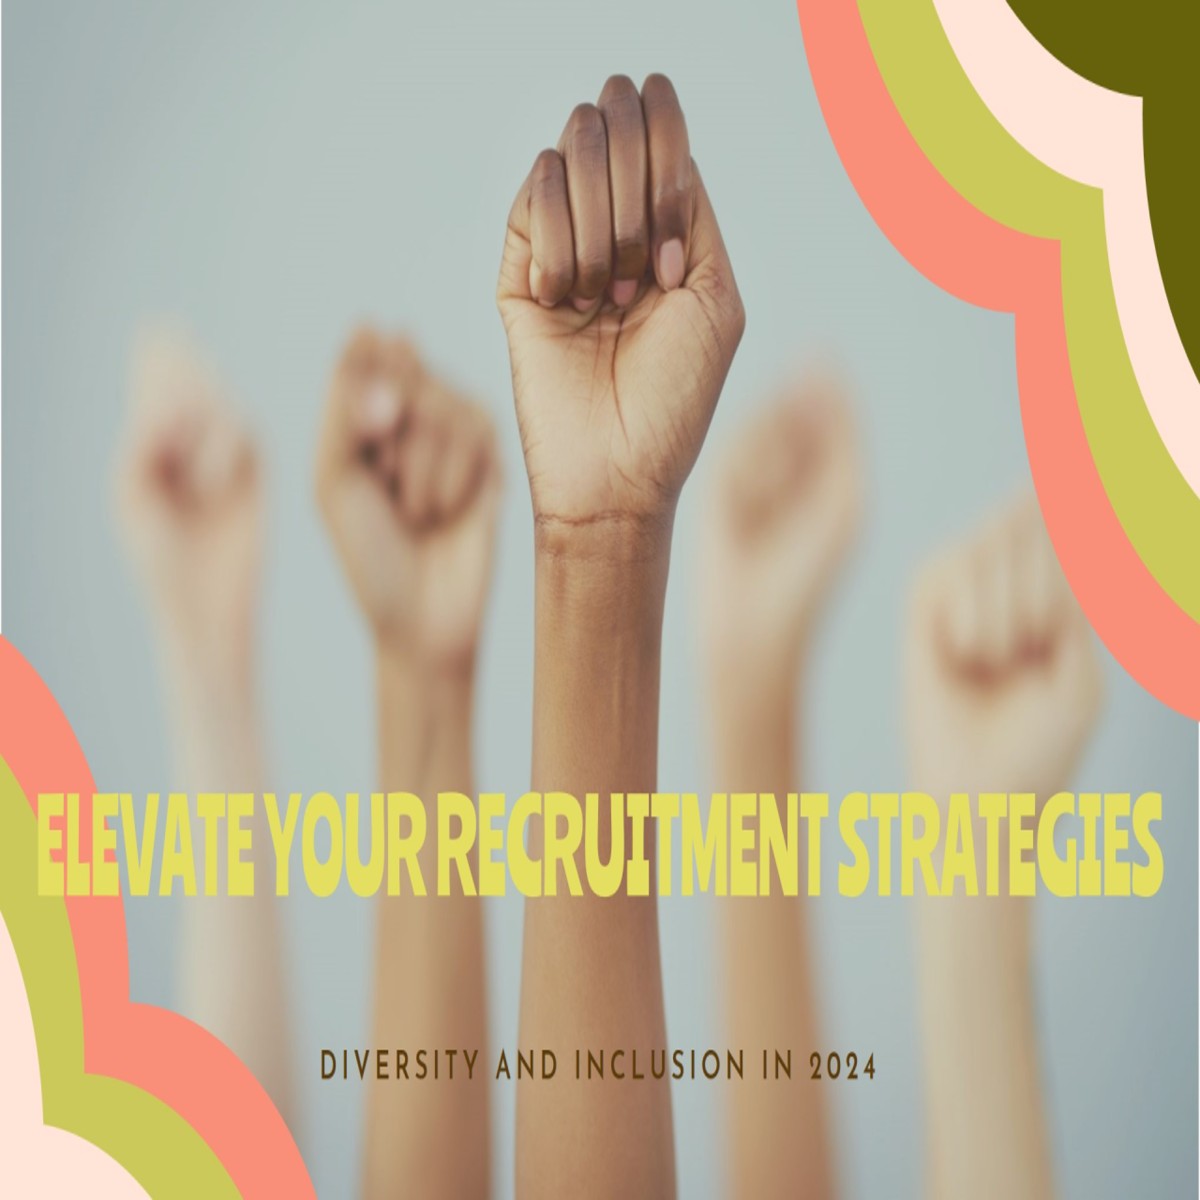 Diversity and Inclusion: Elevating Recruitment Strategies in 2024